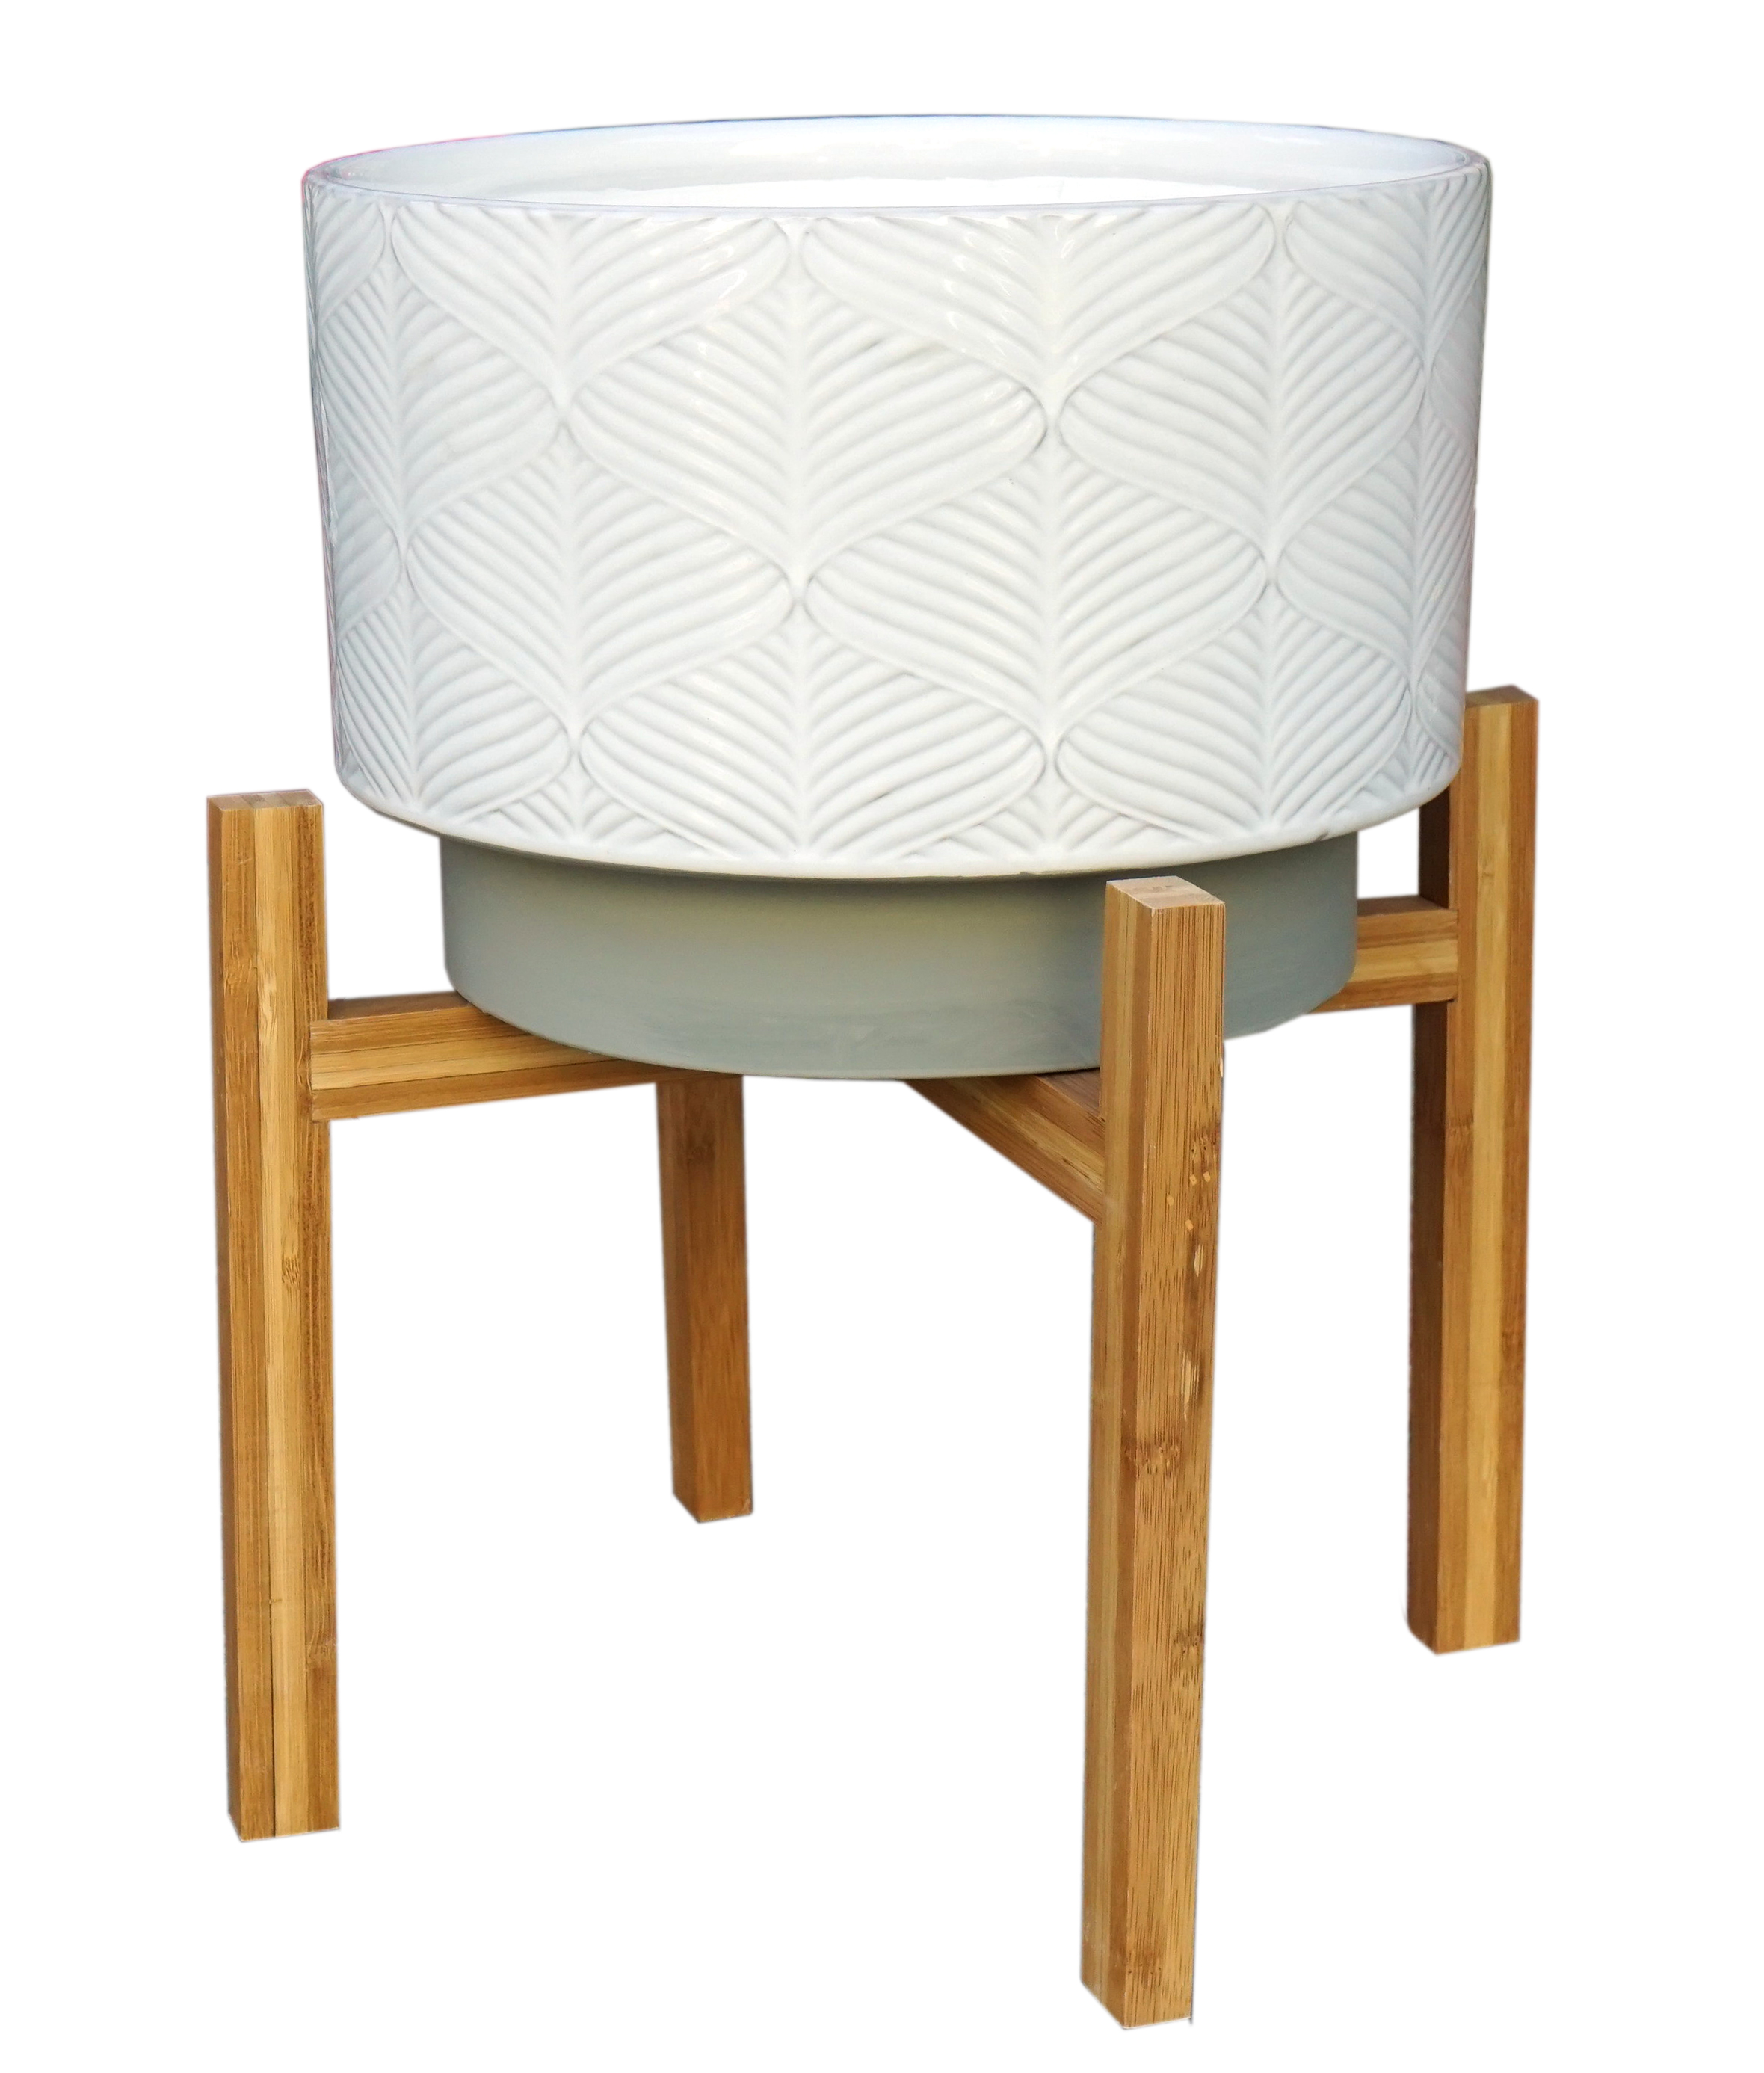 Better Homes & Gardens 11in Kennewick Ceramic Planter With Stand, Ivory - image 1 of 9